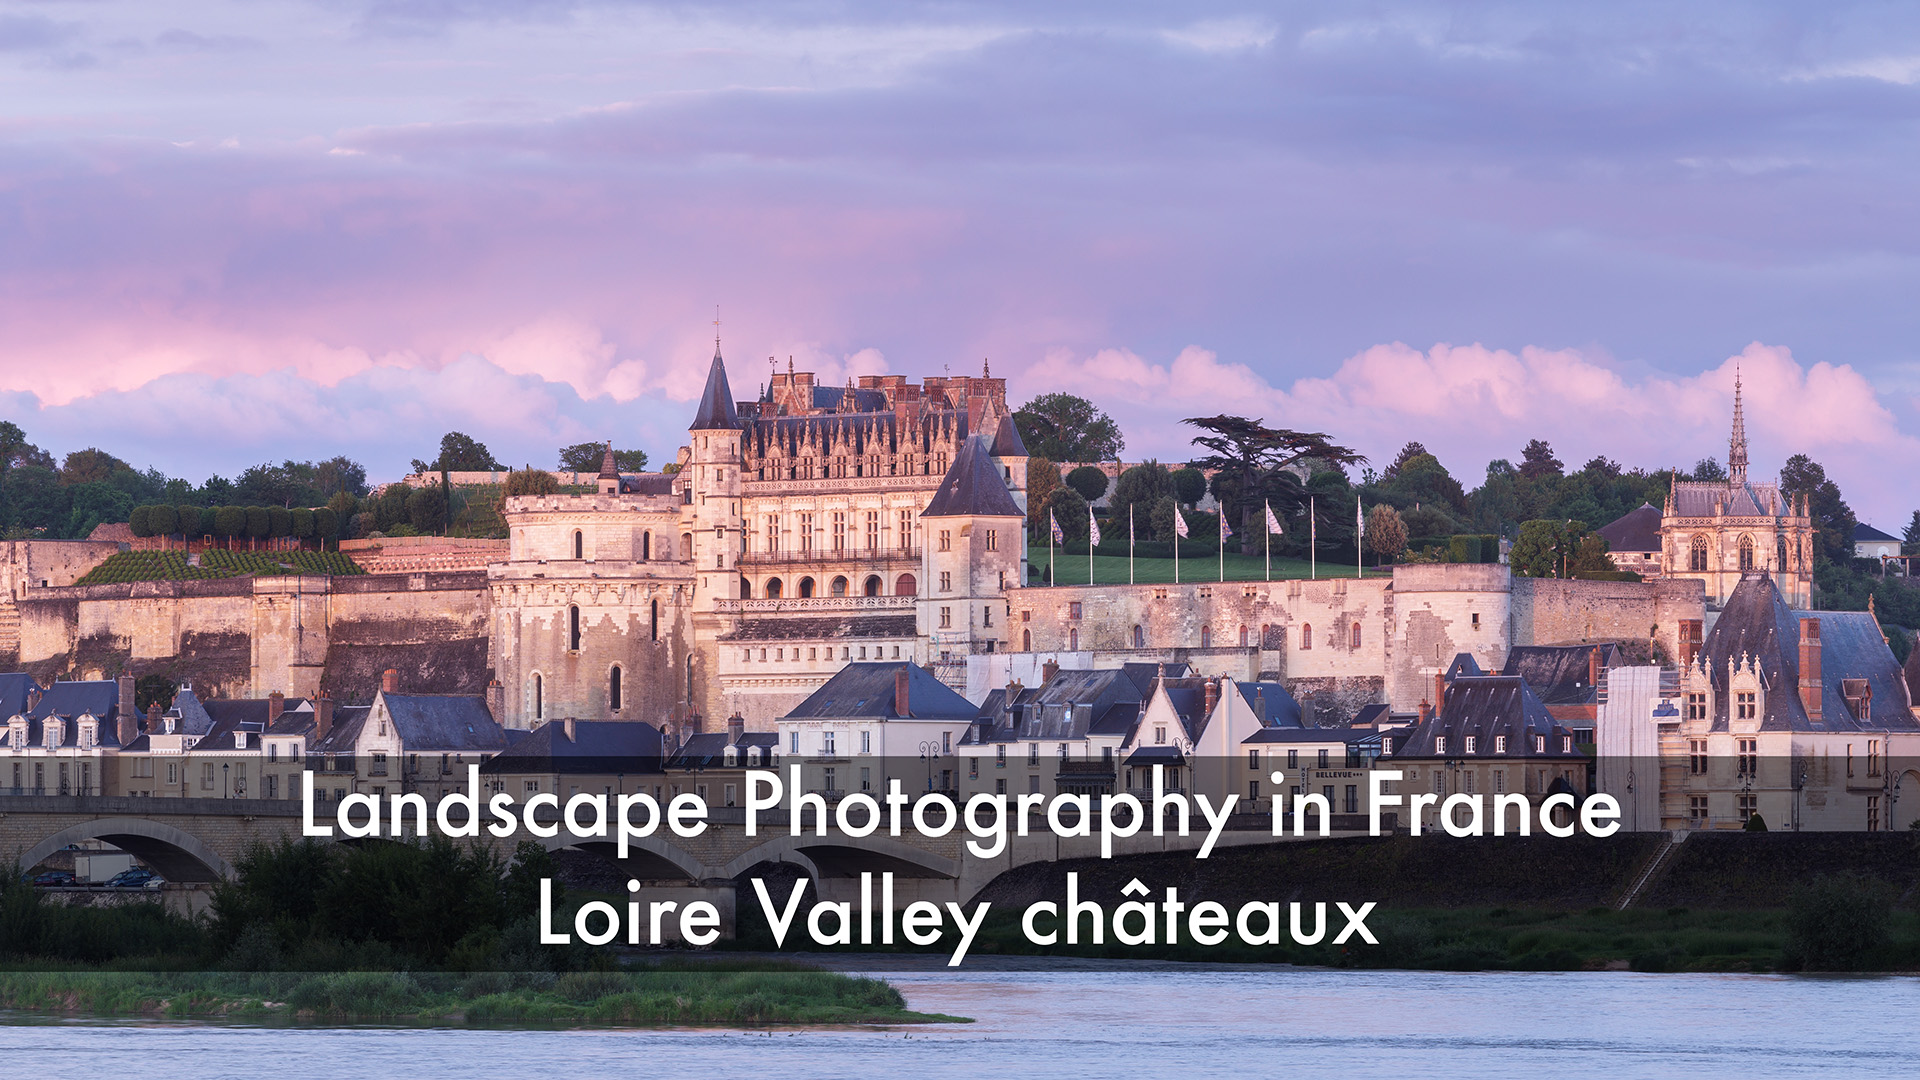 Loire valley châteaux. Amboise and Chenonceau. Landscape photography in France.